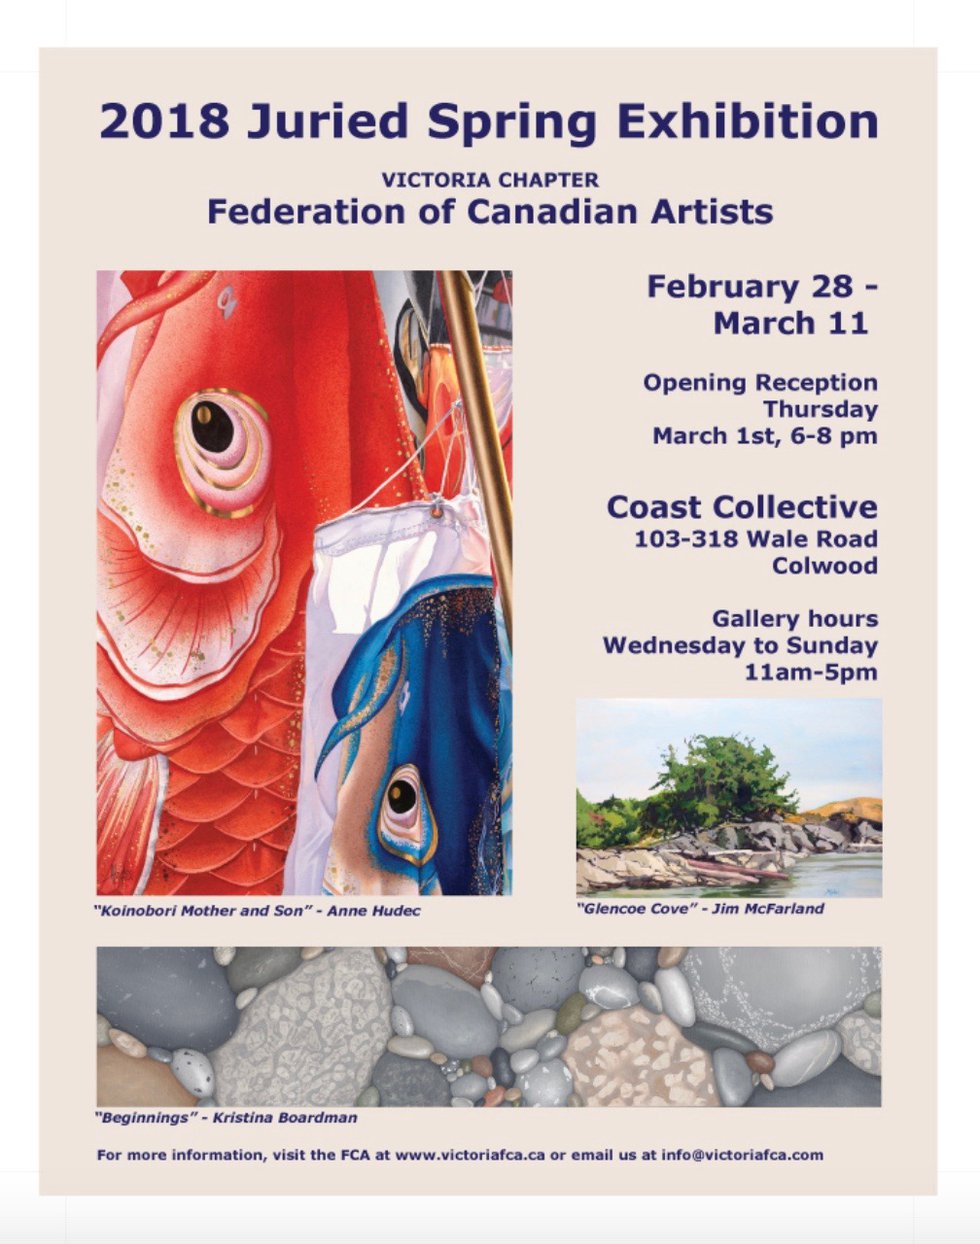 FCA Victoria Chapter 2018 Juried Spring Exhibition